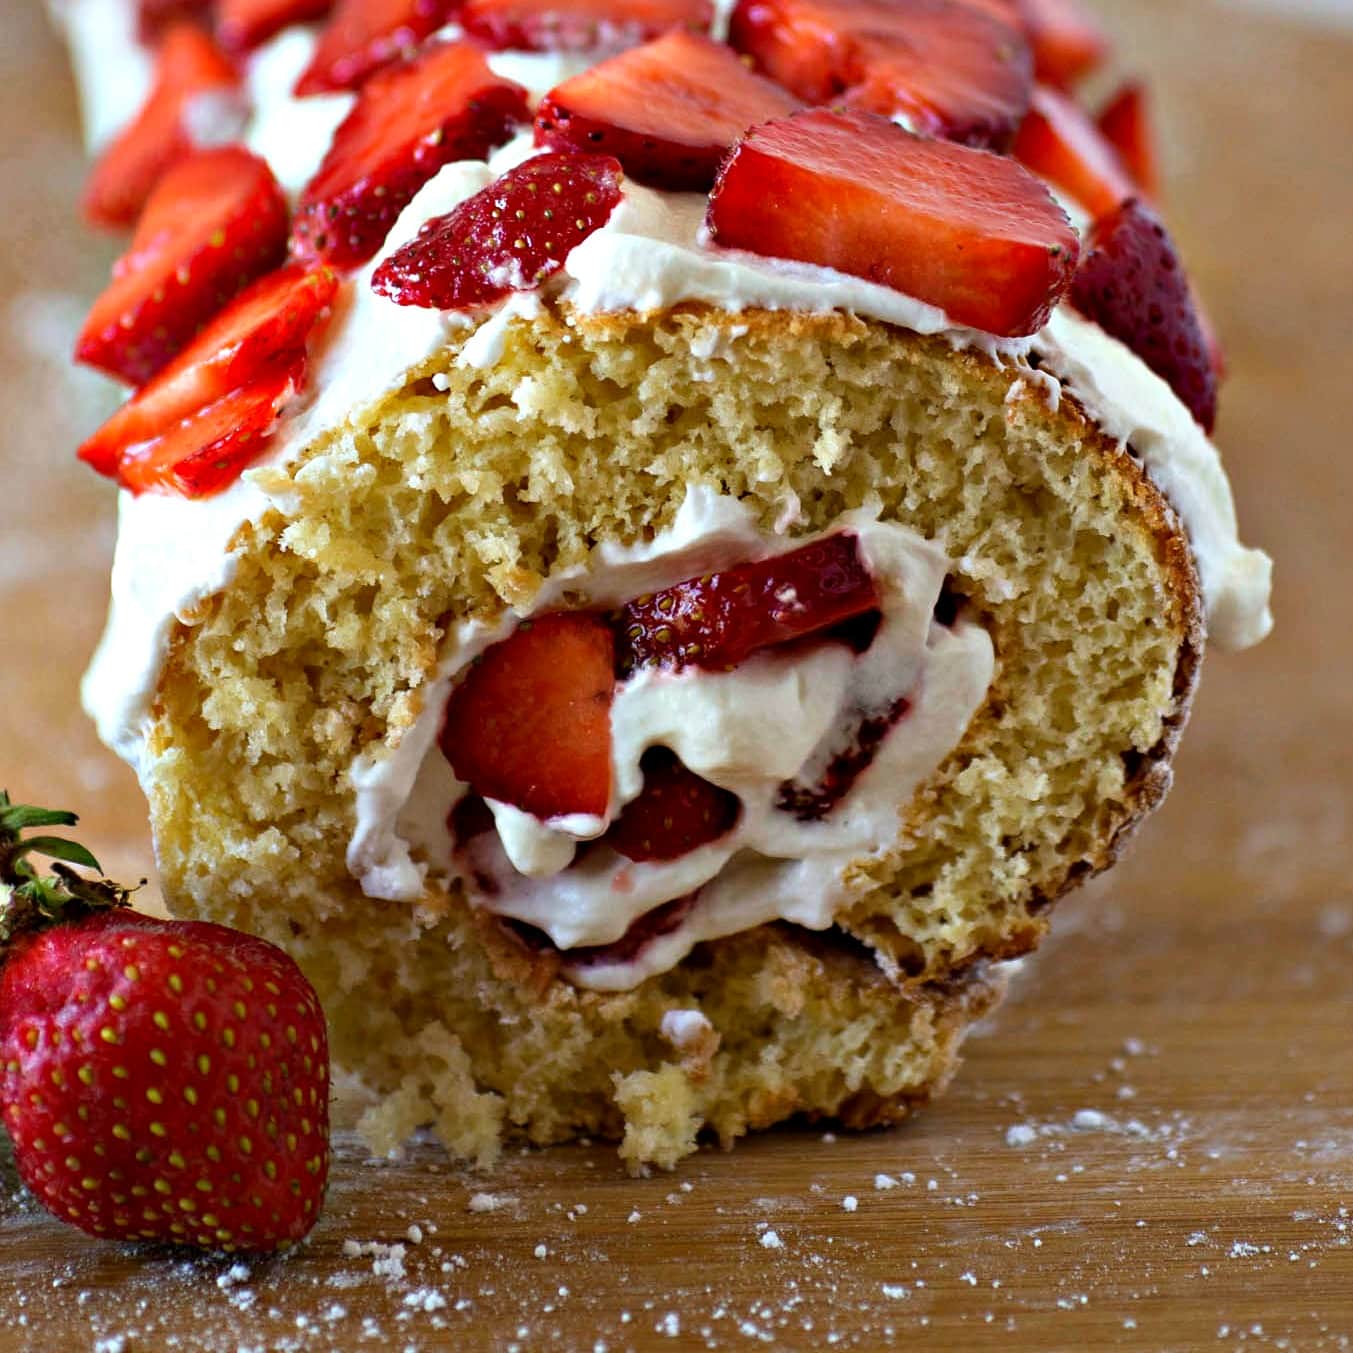 A slice of strawberry roll cake.